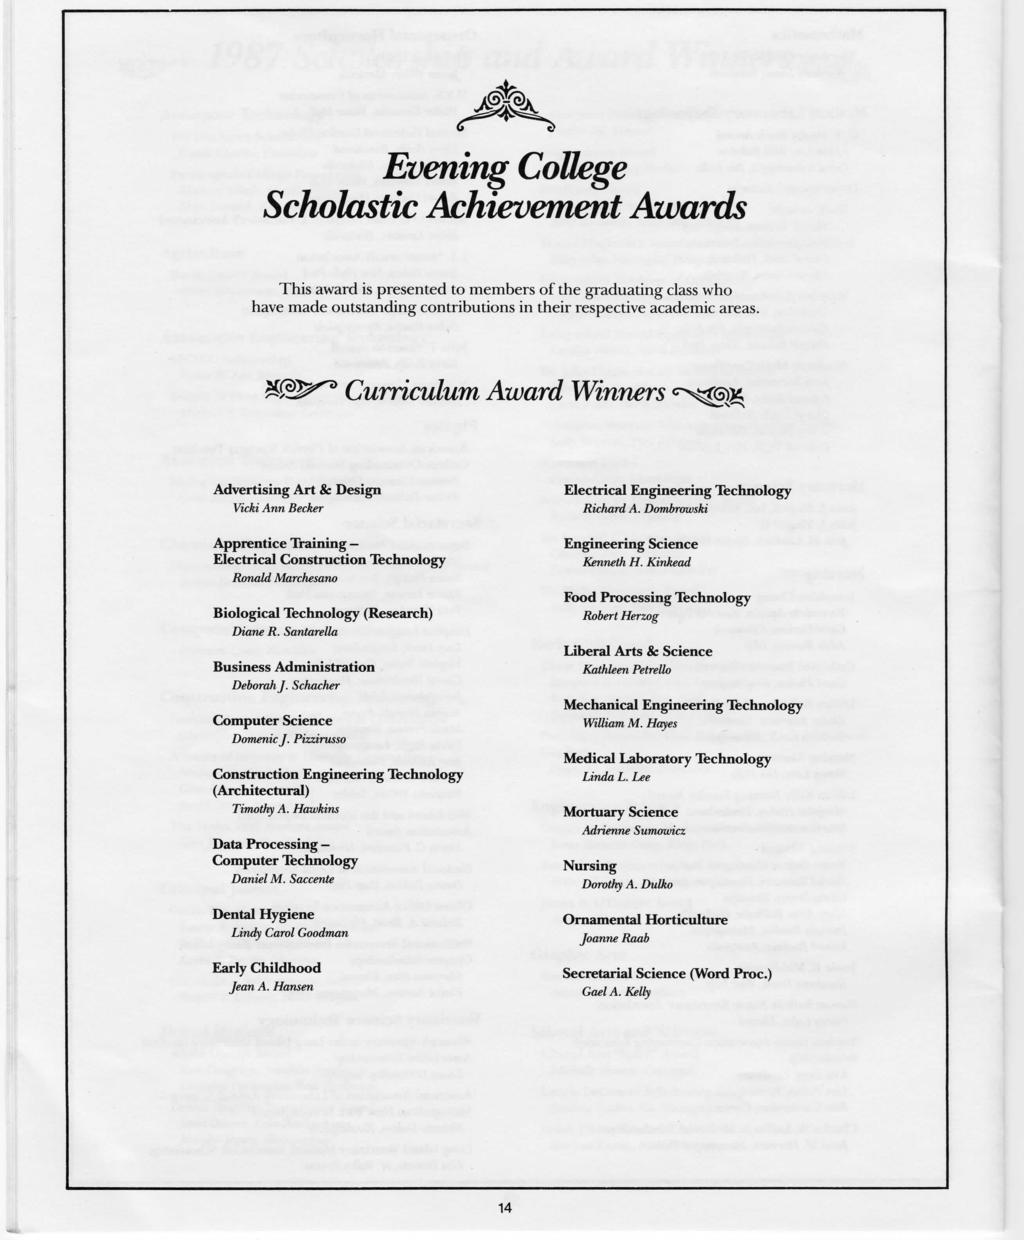 Evening College Scholastic Achievement Awards This award is presented to members of the graduating class who have made outstanding contributions in their respective academic areas.